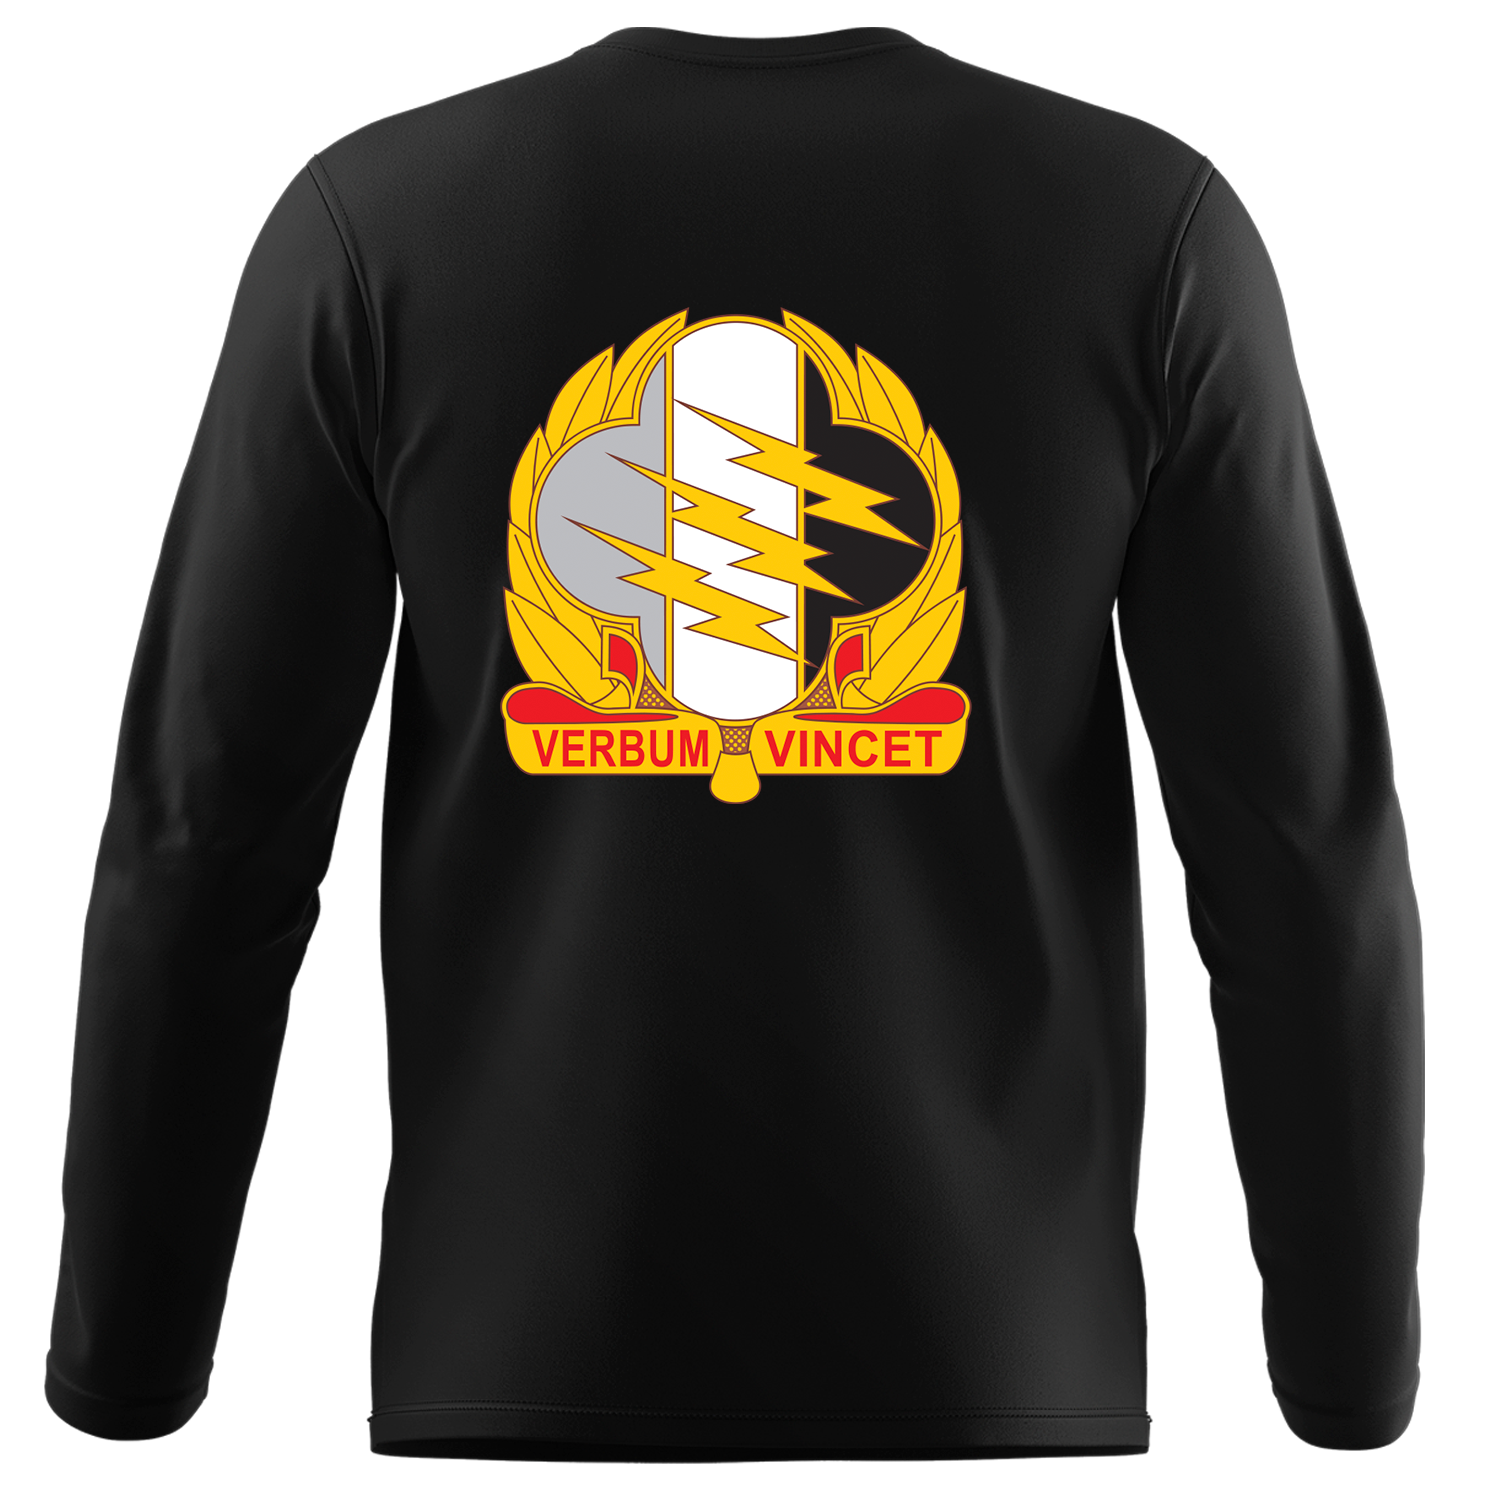 4th Psychological Operations Group Long Sleeve T-Shirt